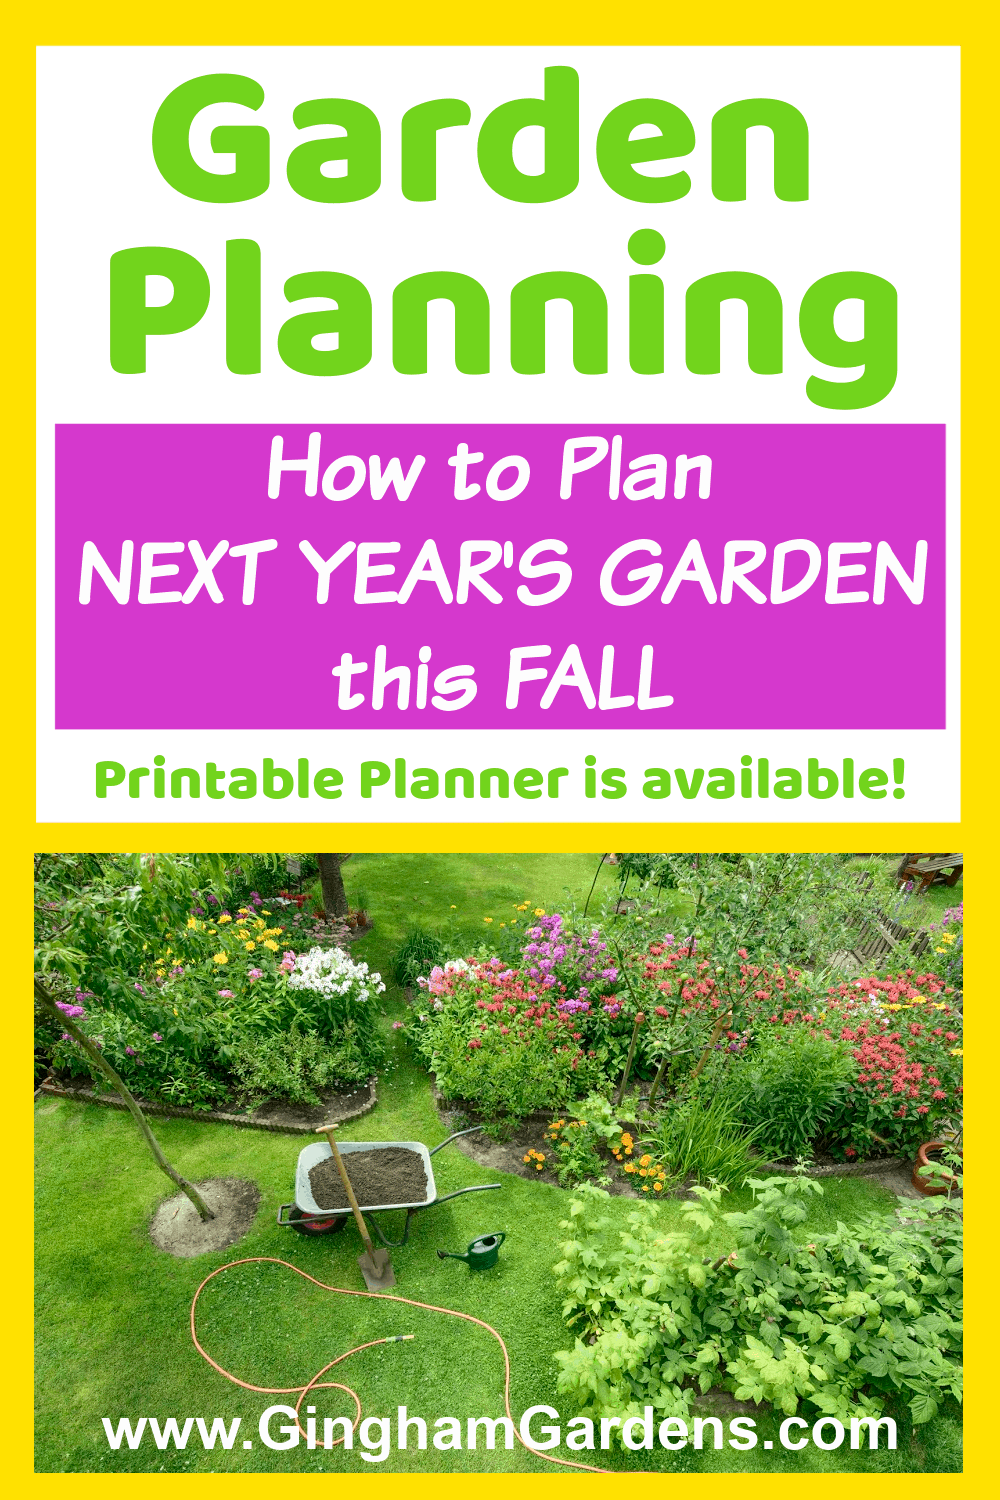 Image of a garden with text overlay - Garden Planning